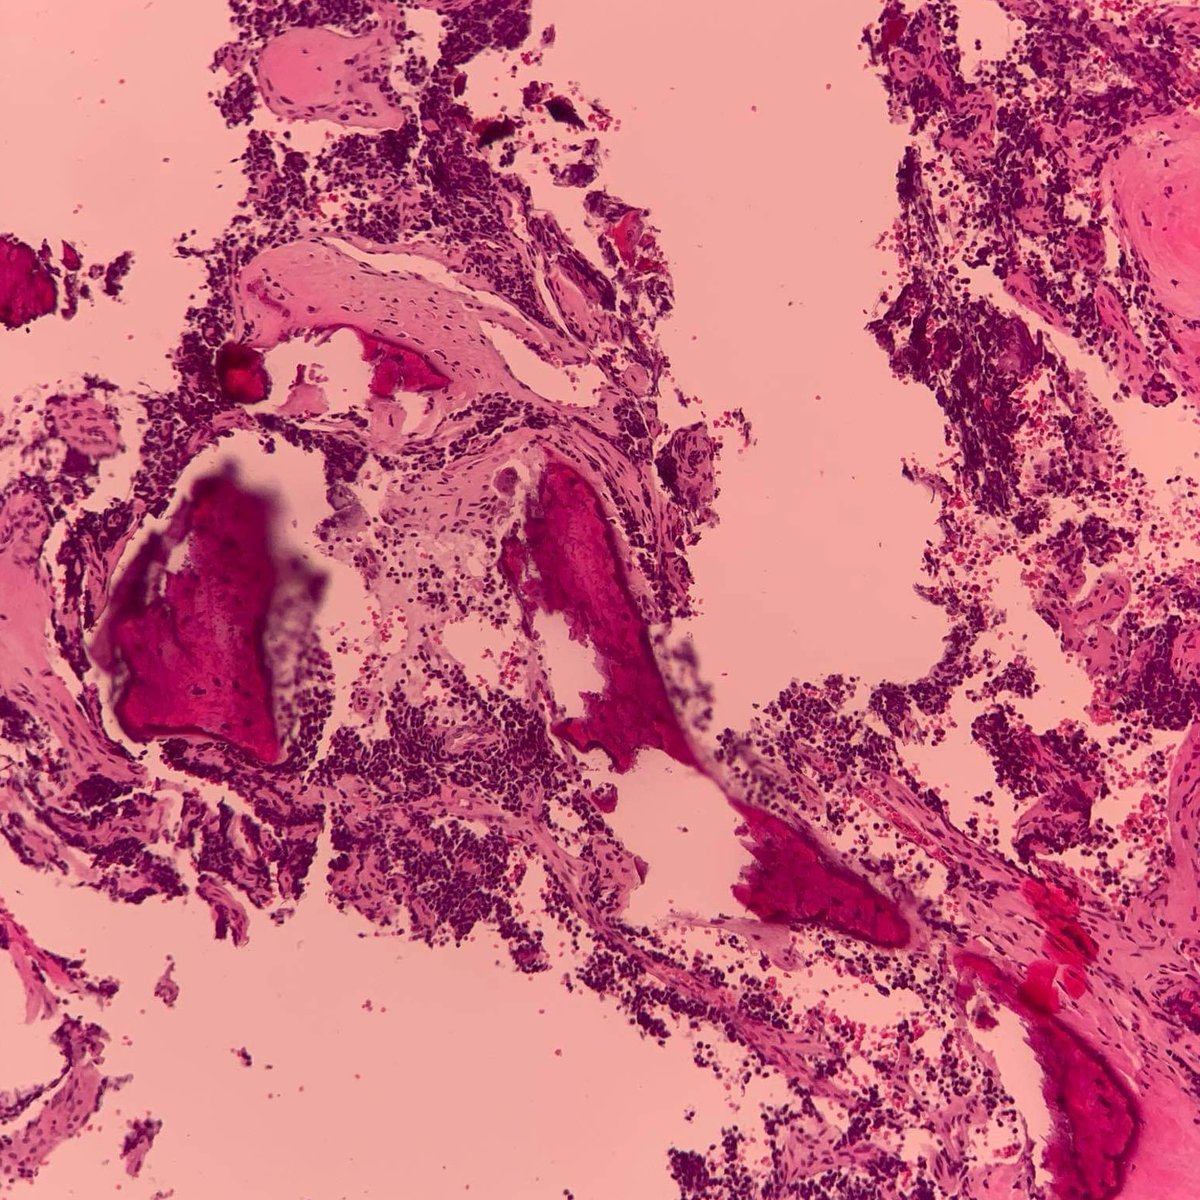 Bone case, 8yo female, bone lytic lesion of left proximal tibia, curettage biopsy was performed. Radiologically: osteosarcoma, chondrosarcoma, Ewings sarcoma. What is your diagnosis? #PathTwitter #pathtweet
IHC: Cd45 /-/ Ck pan /-/ Cd20 /-/ Vimentin /+/ Synaptophysin /-/ Cd99 /+/